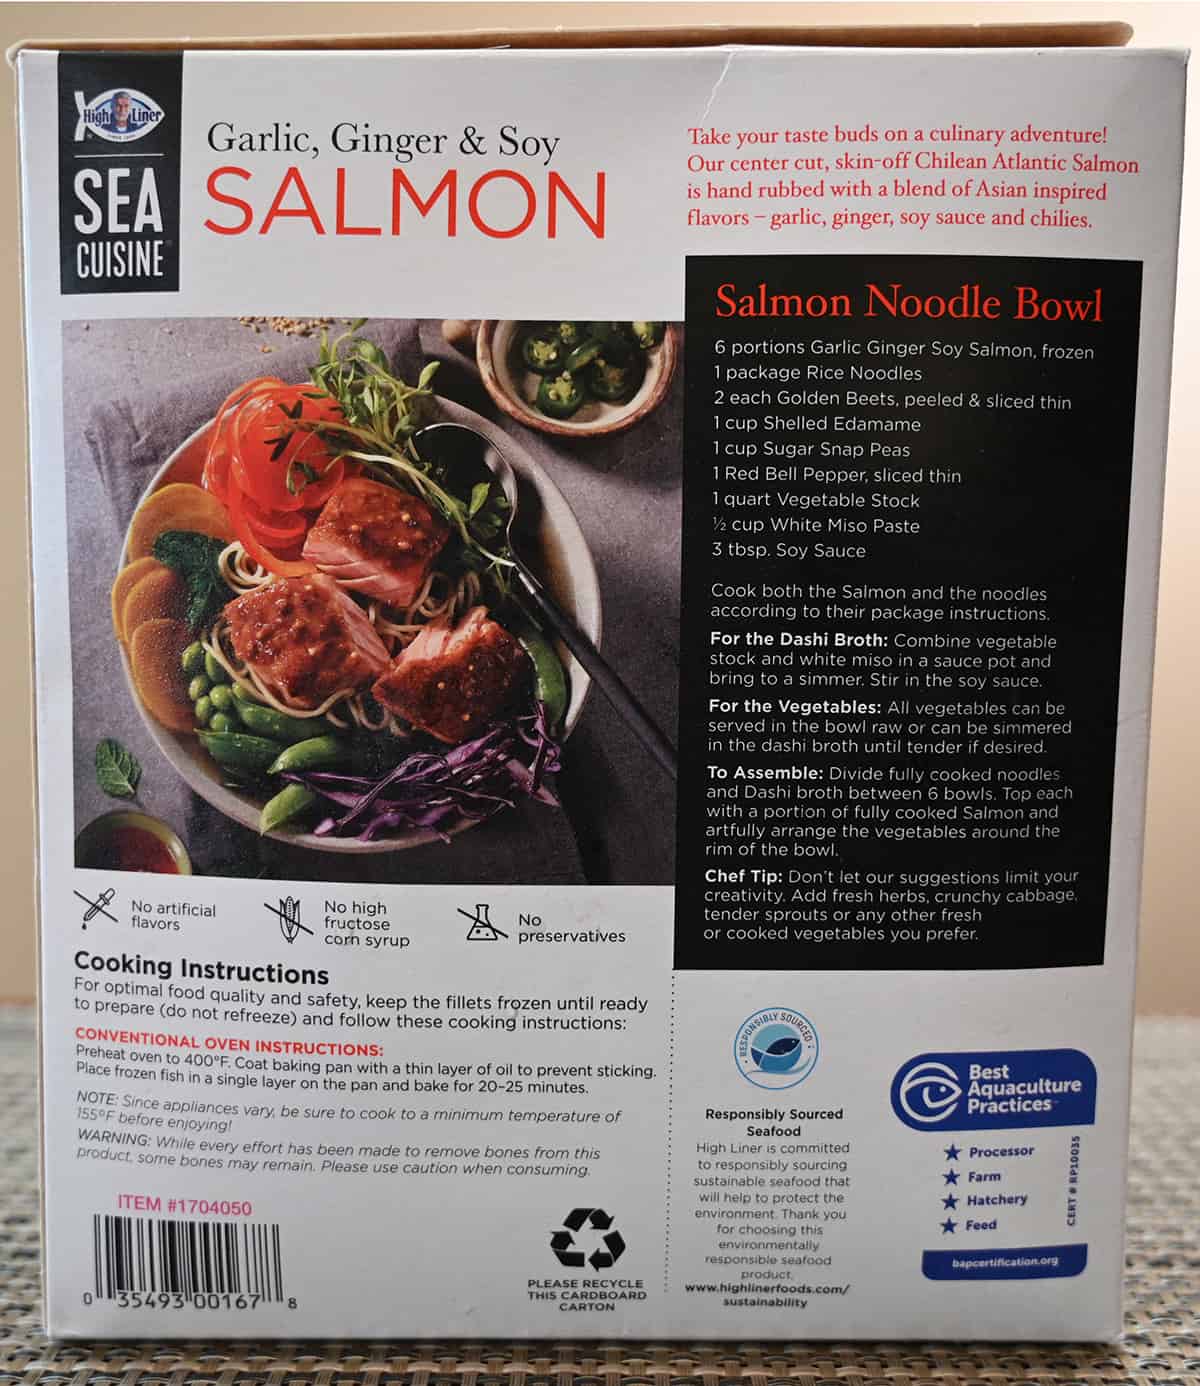 Closeup image of the back of the box of salmon showing the product description, cooking instructions and a recipe for a salmon noodle bowl.